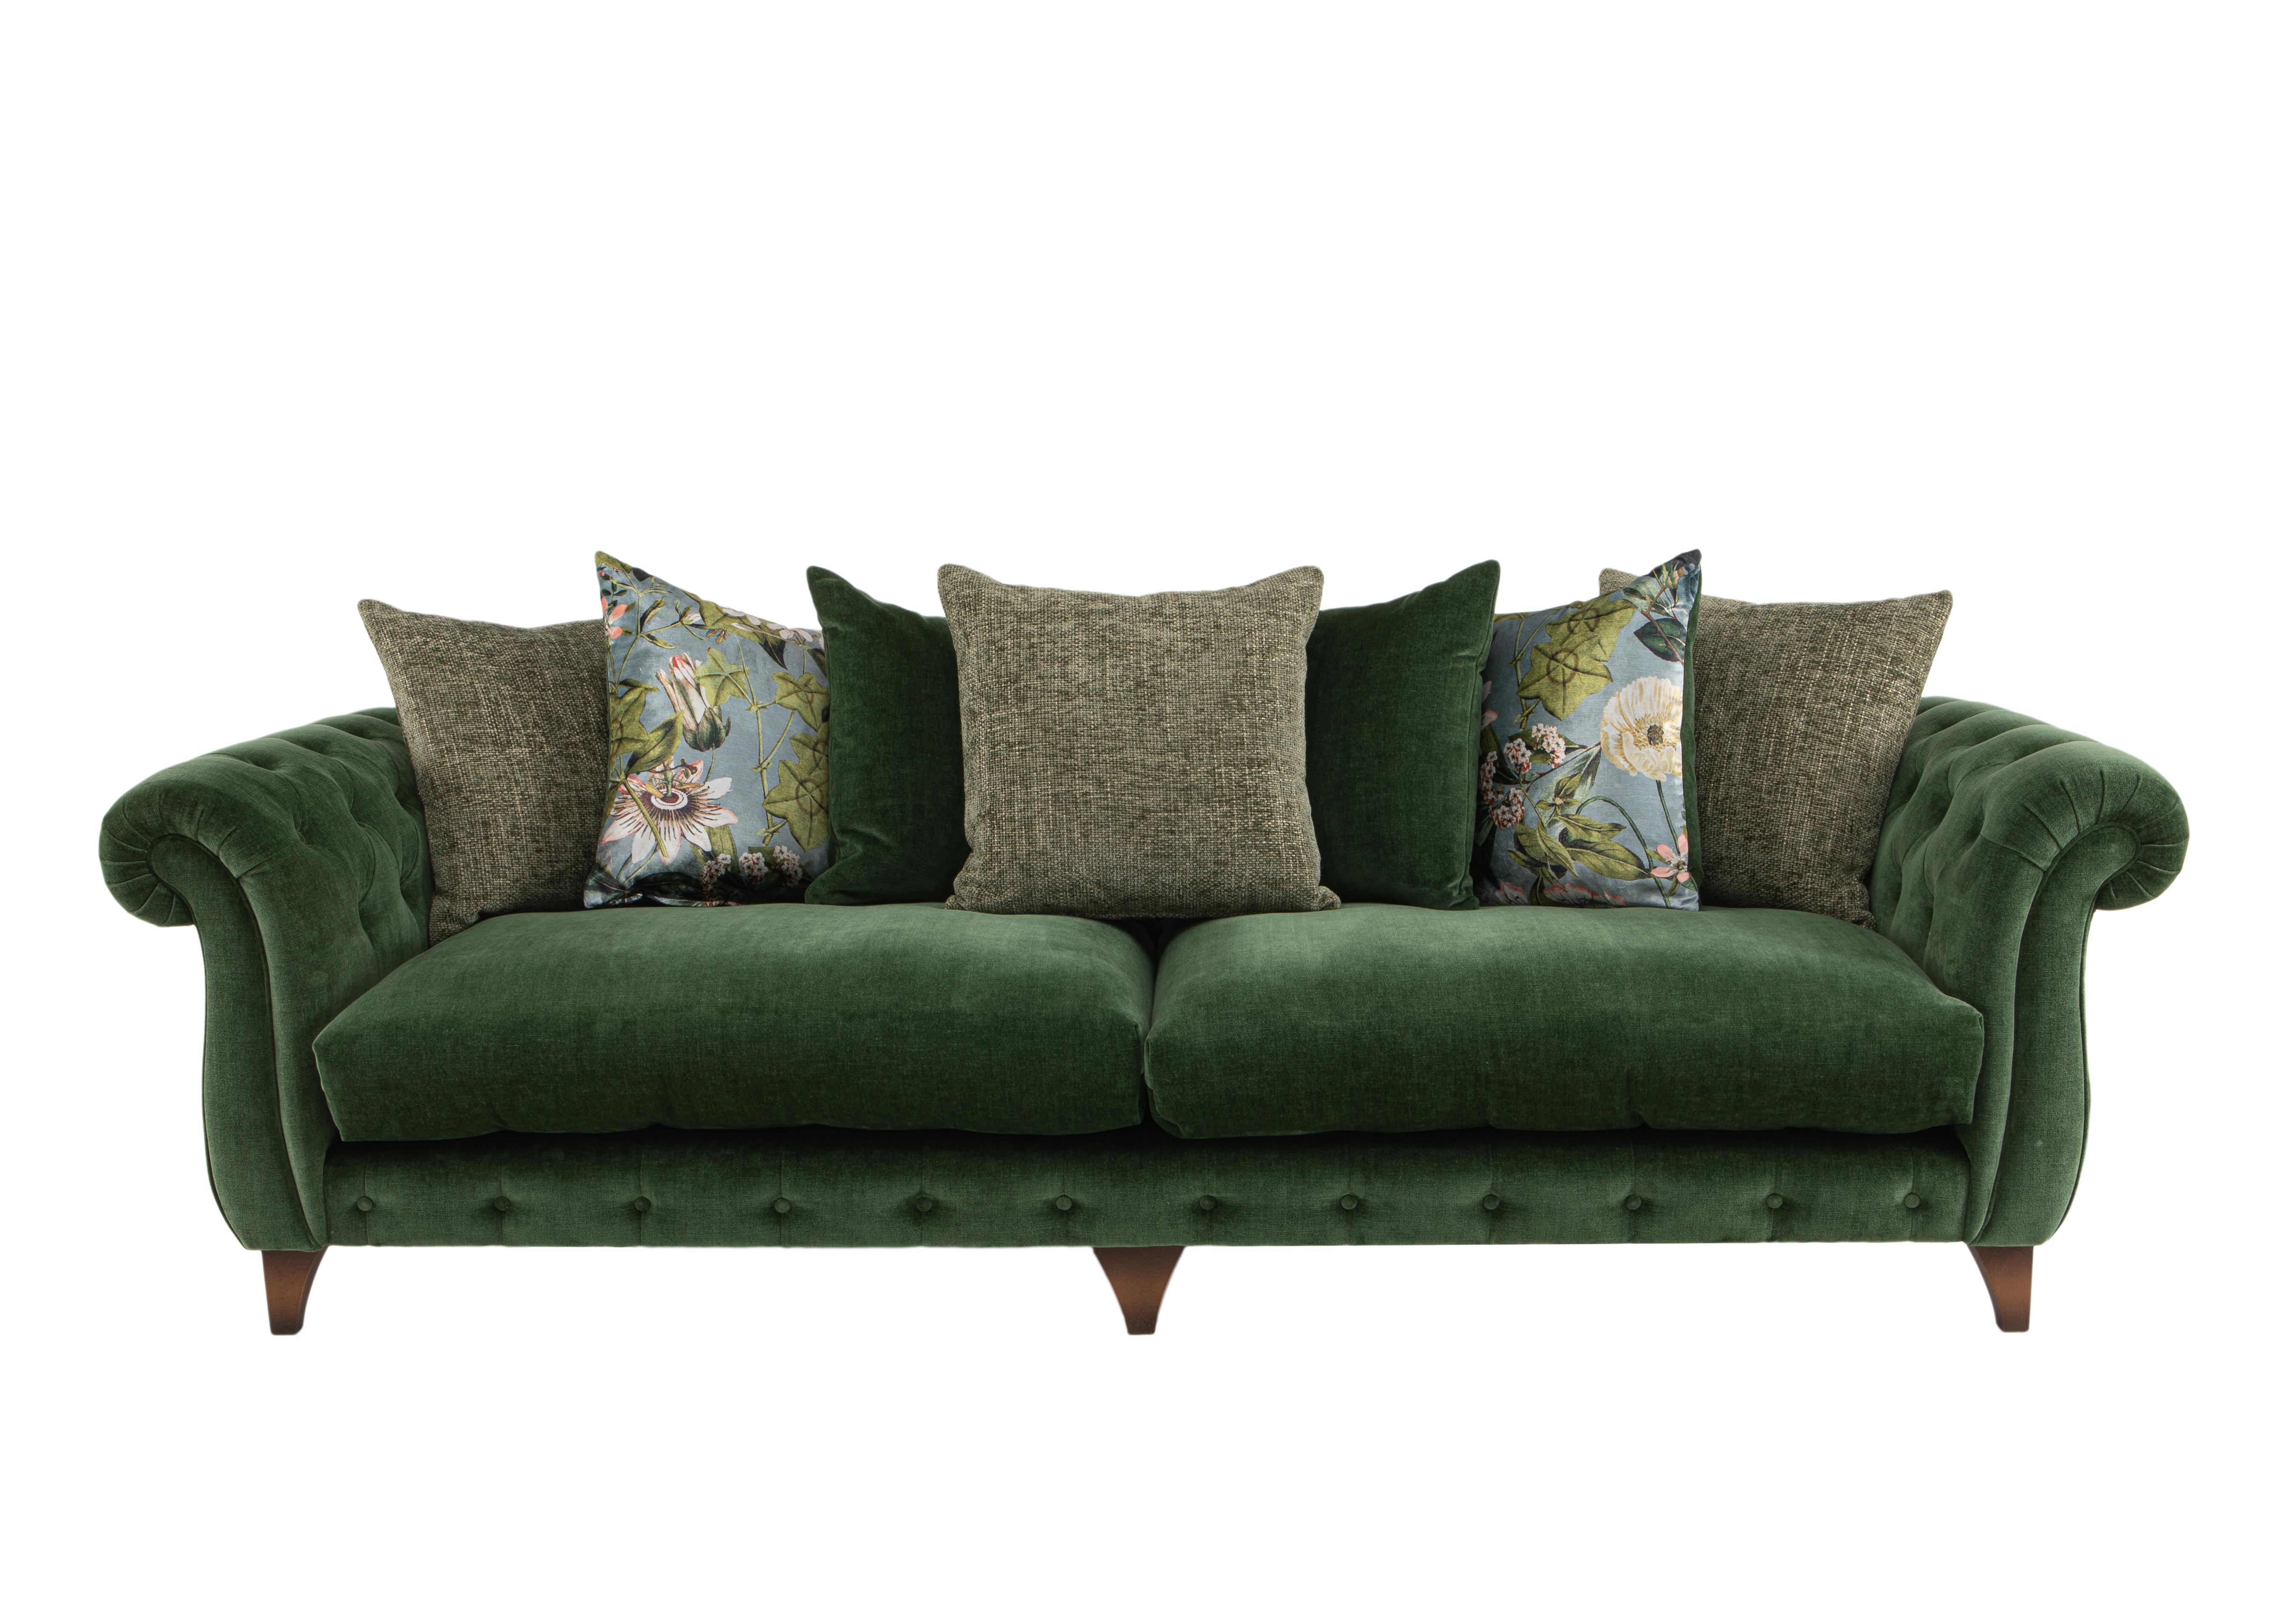 Boutique Palace Fabric Grande Scatter Back Sofa in Oasis Parrot on Furniture Village